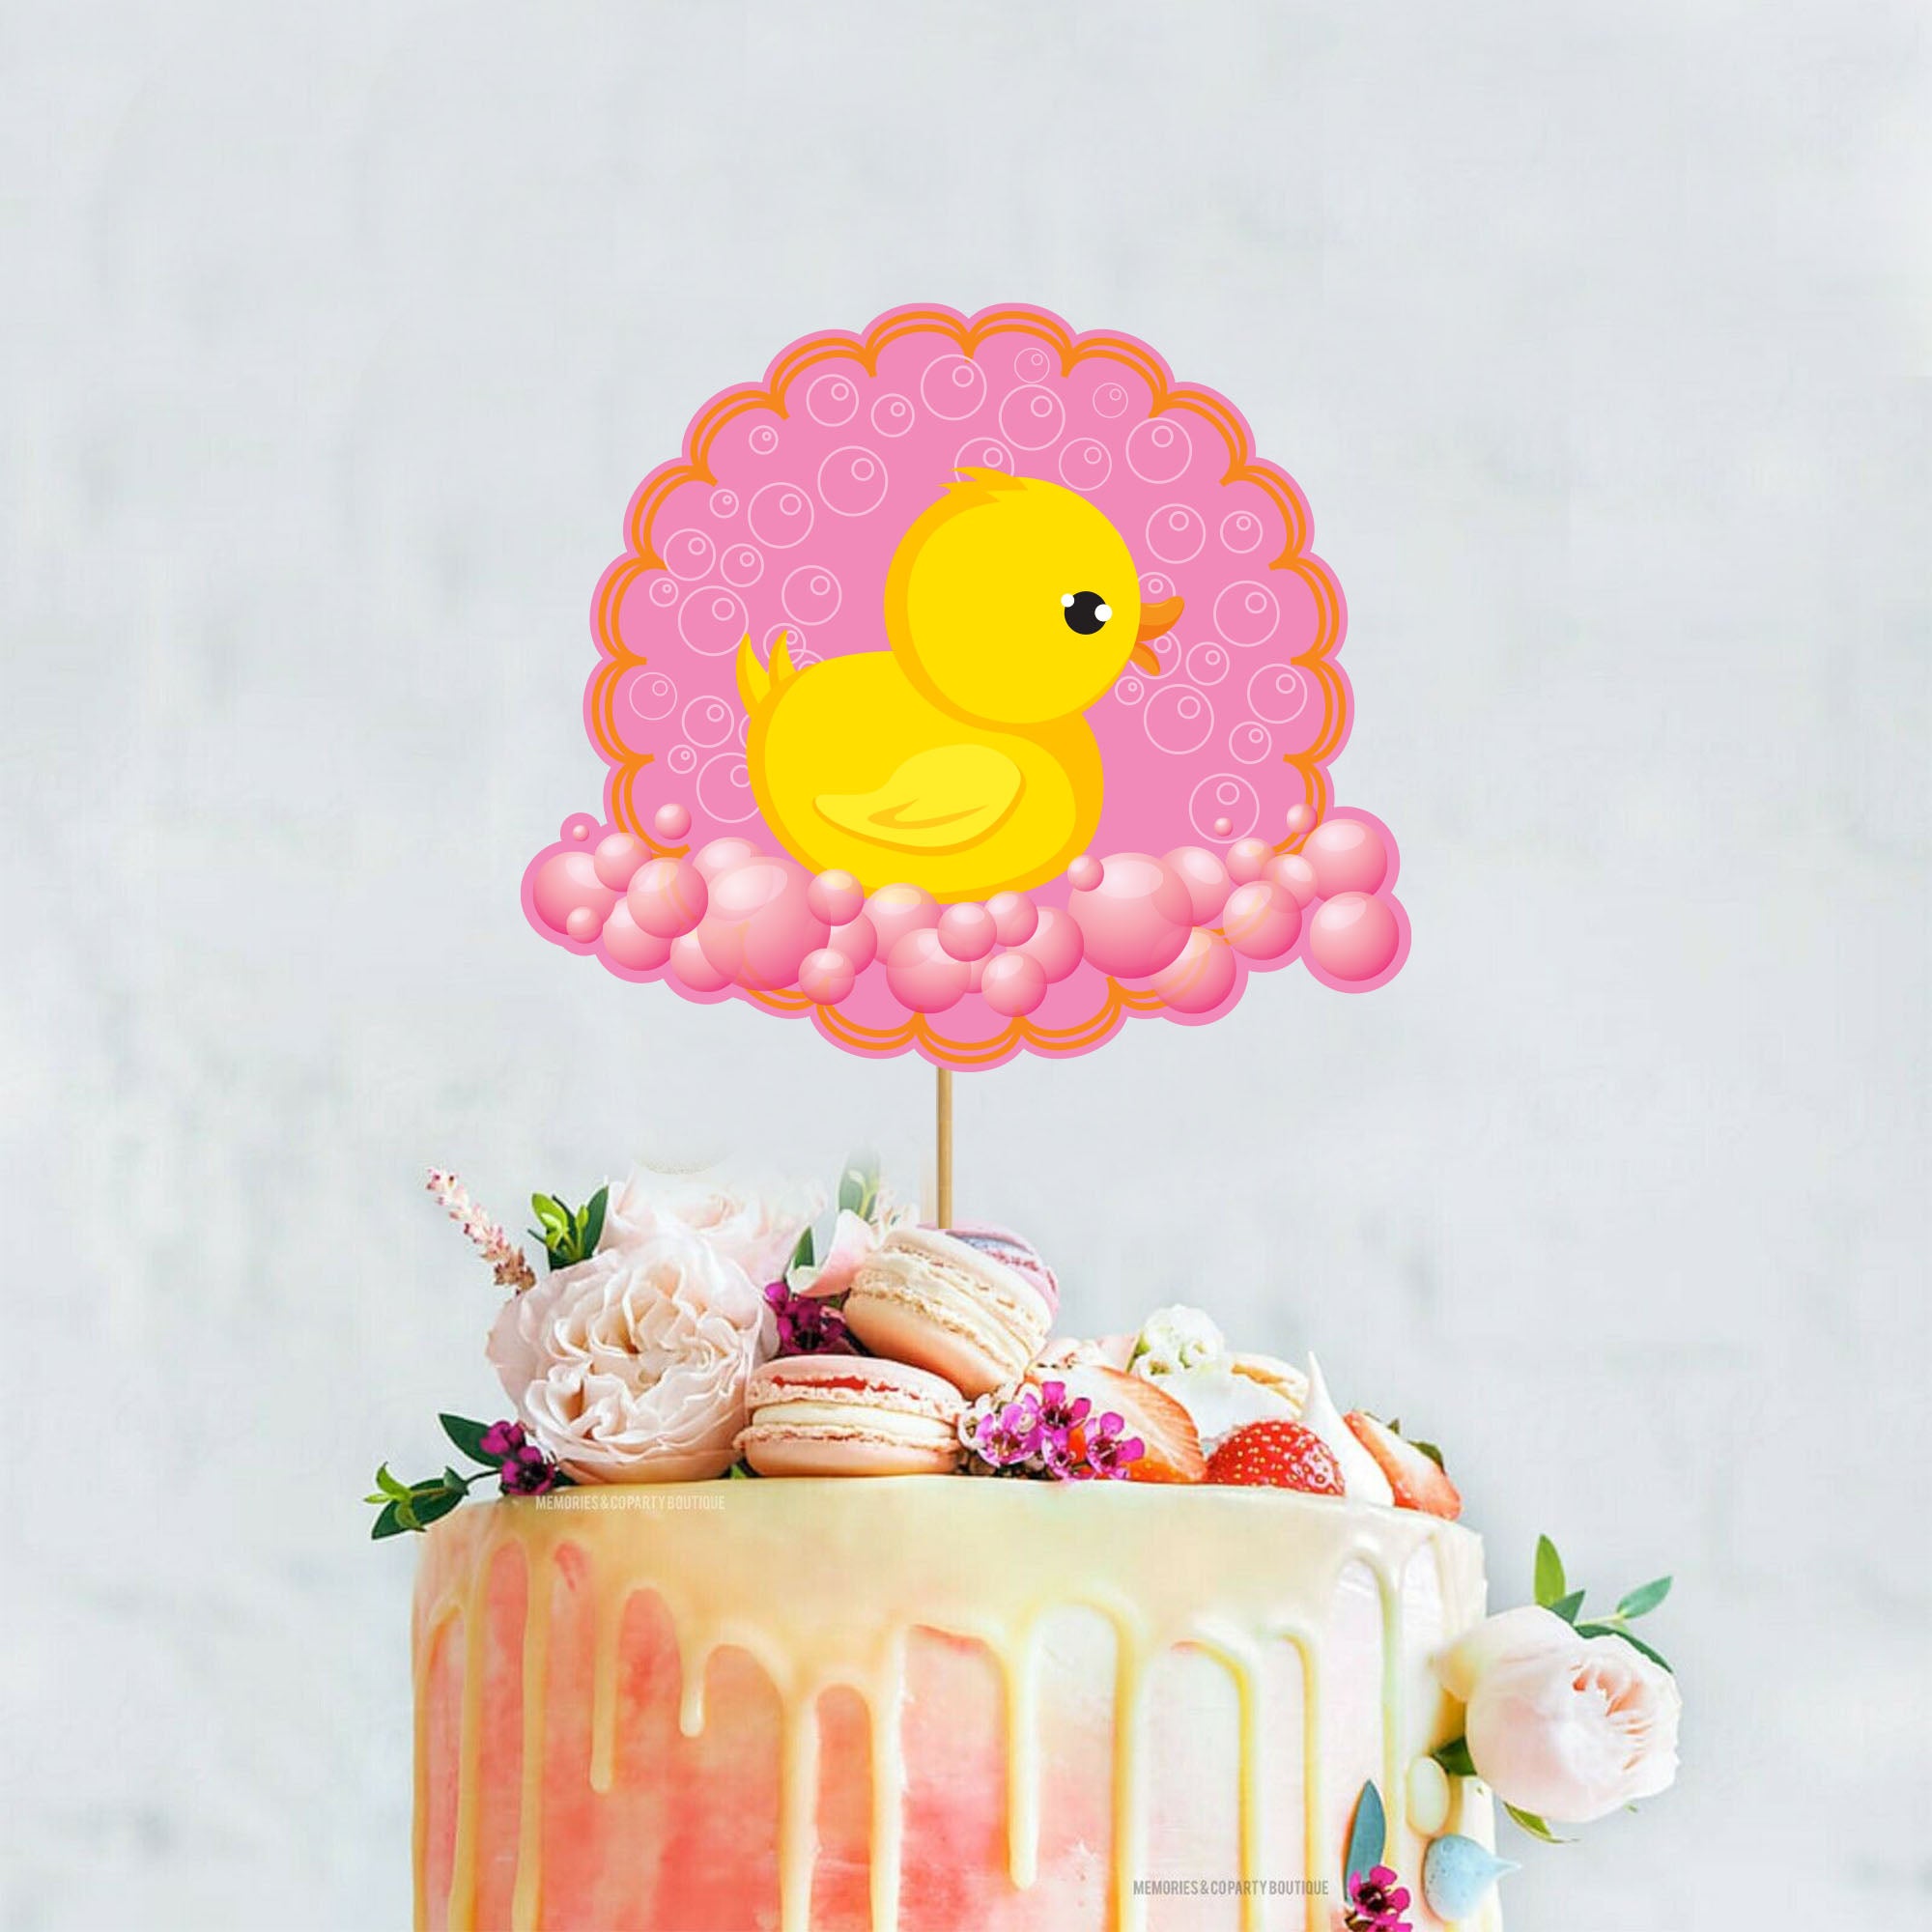 Baby Duckies Shower cake - A Little Cake